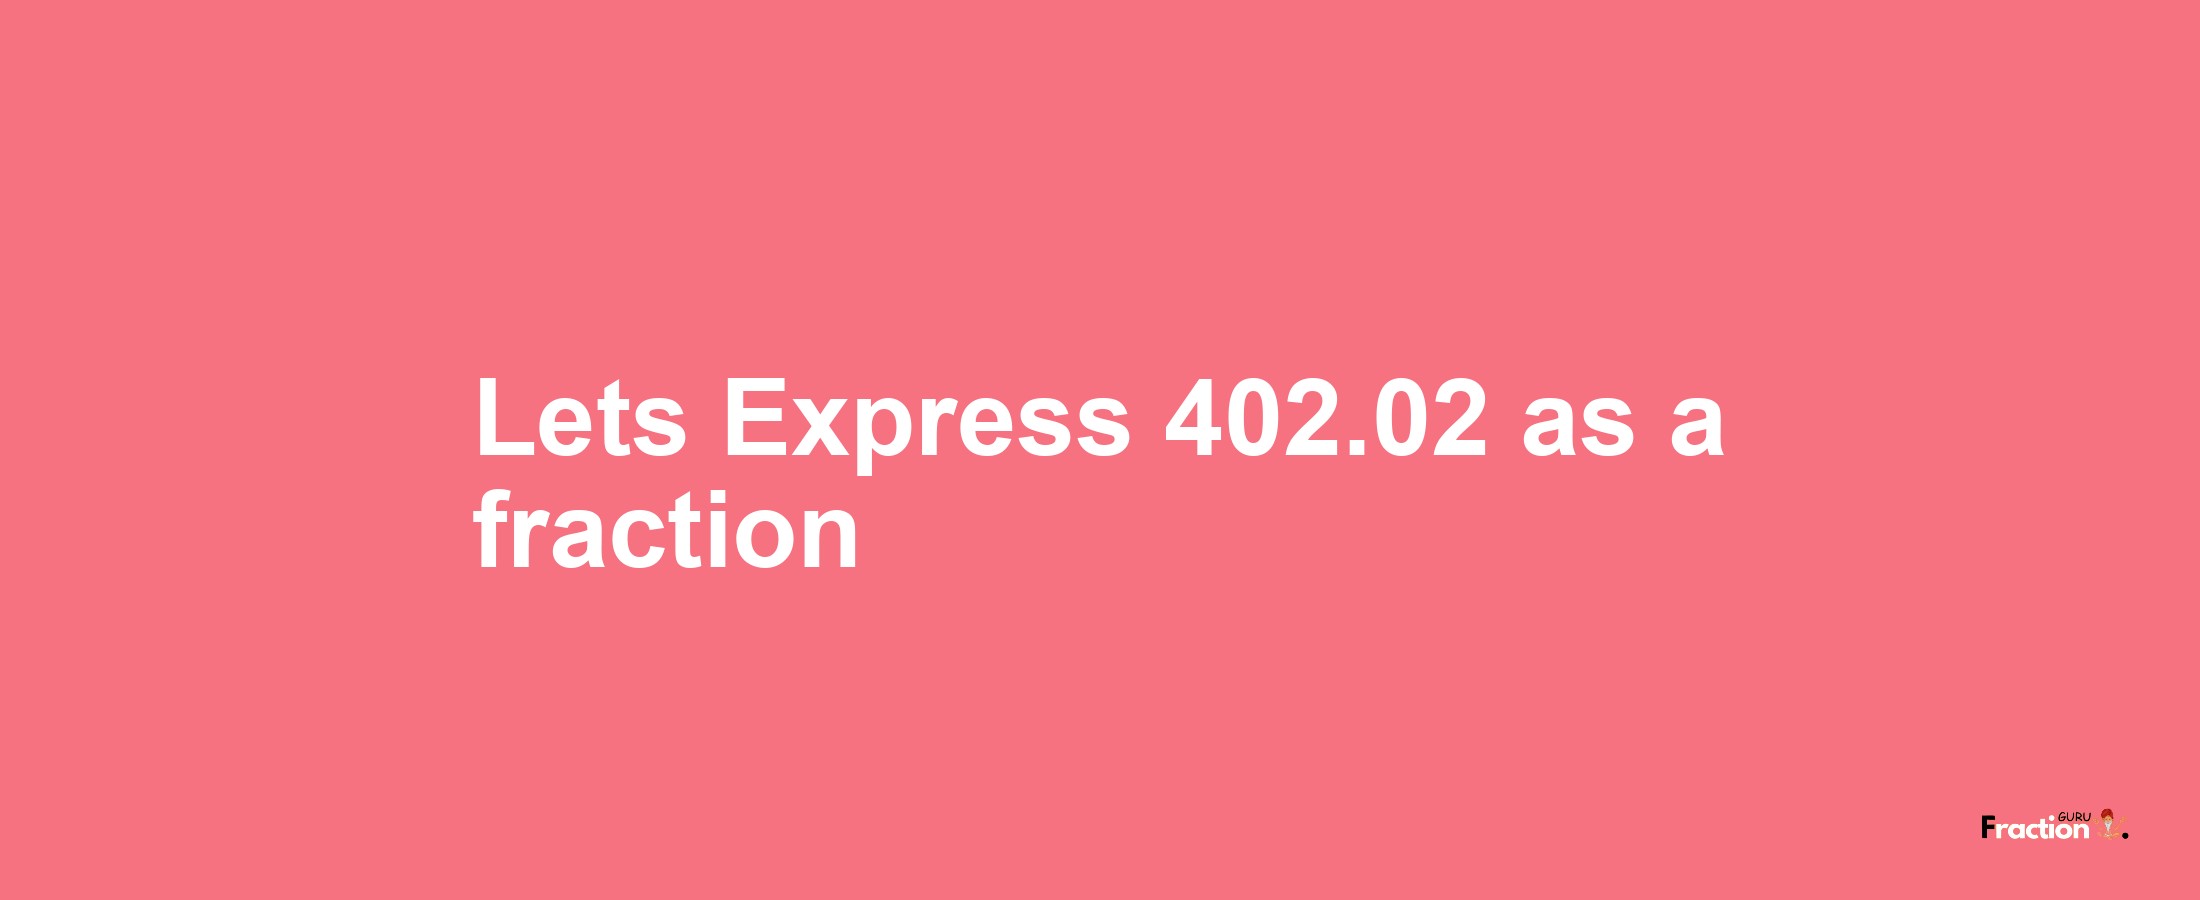 Lets Express 402.02 as afraction